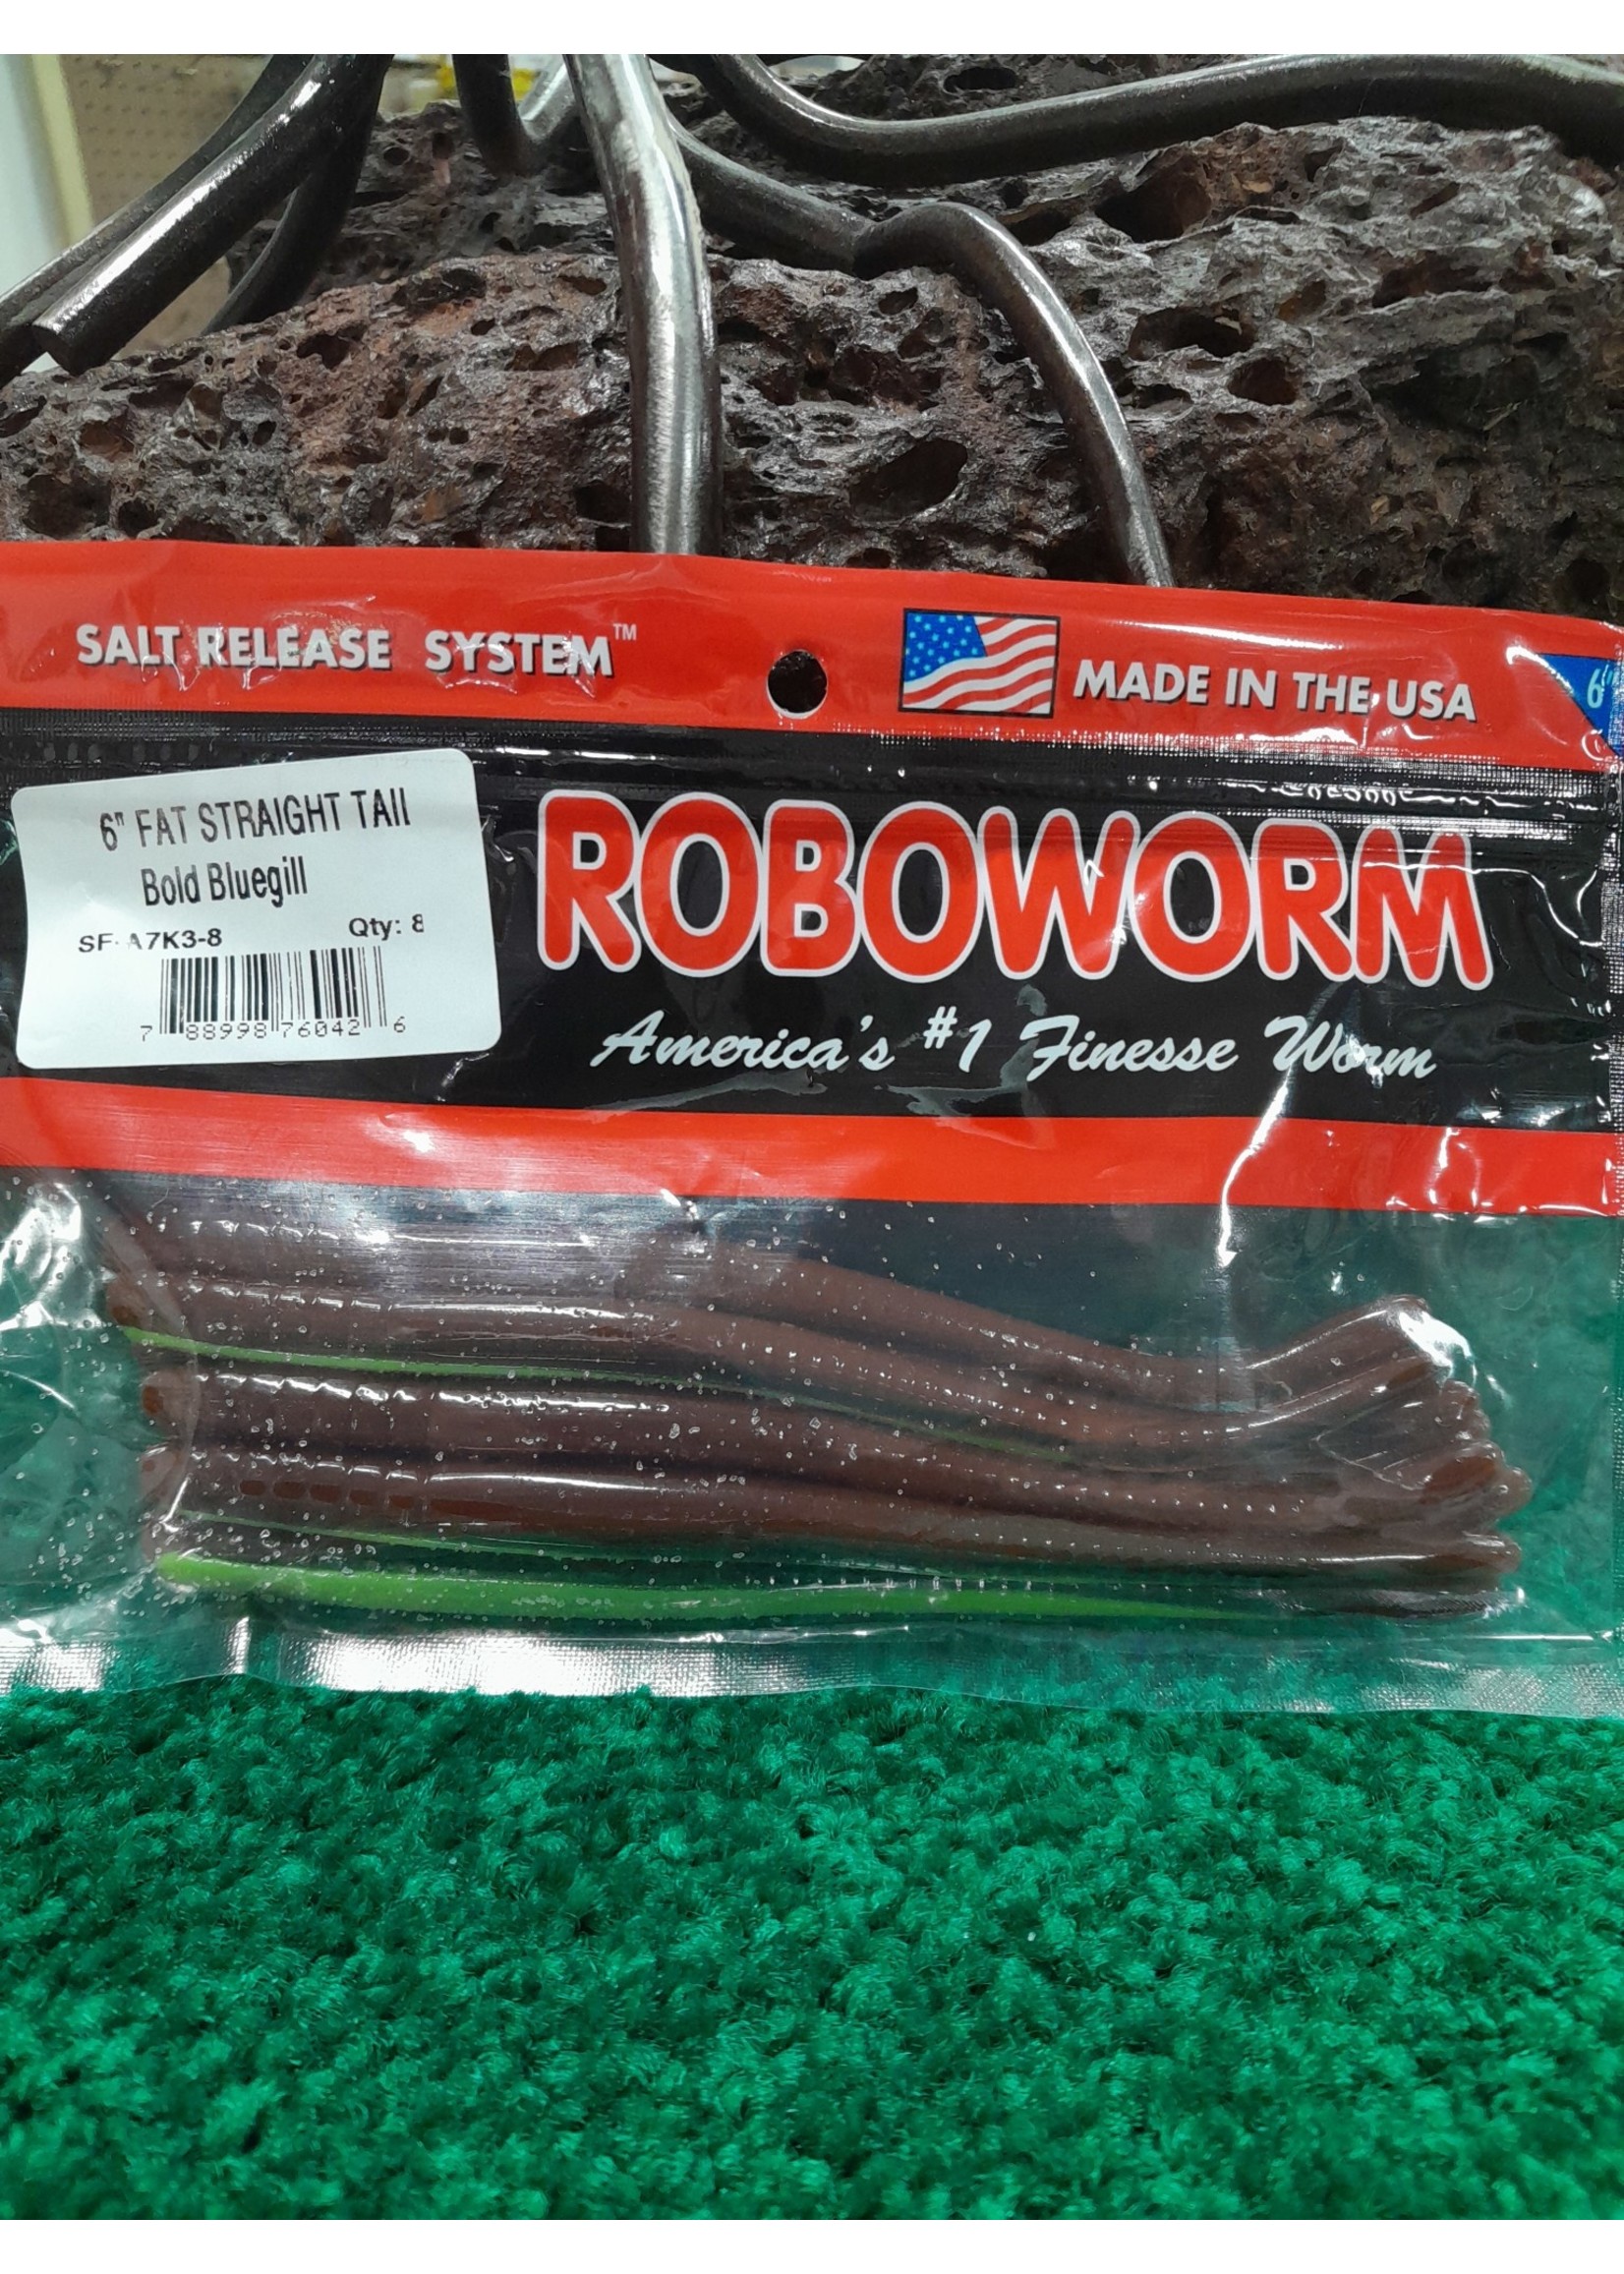 ROBOWORMS 6" FAT STRAIGHT TAIL  BOLD BLUEGILL QTY:8